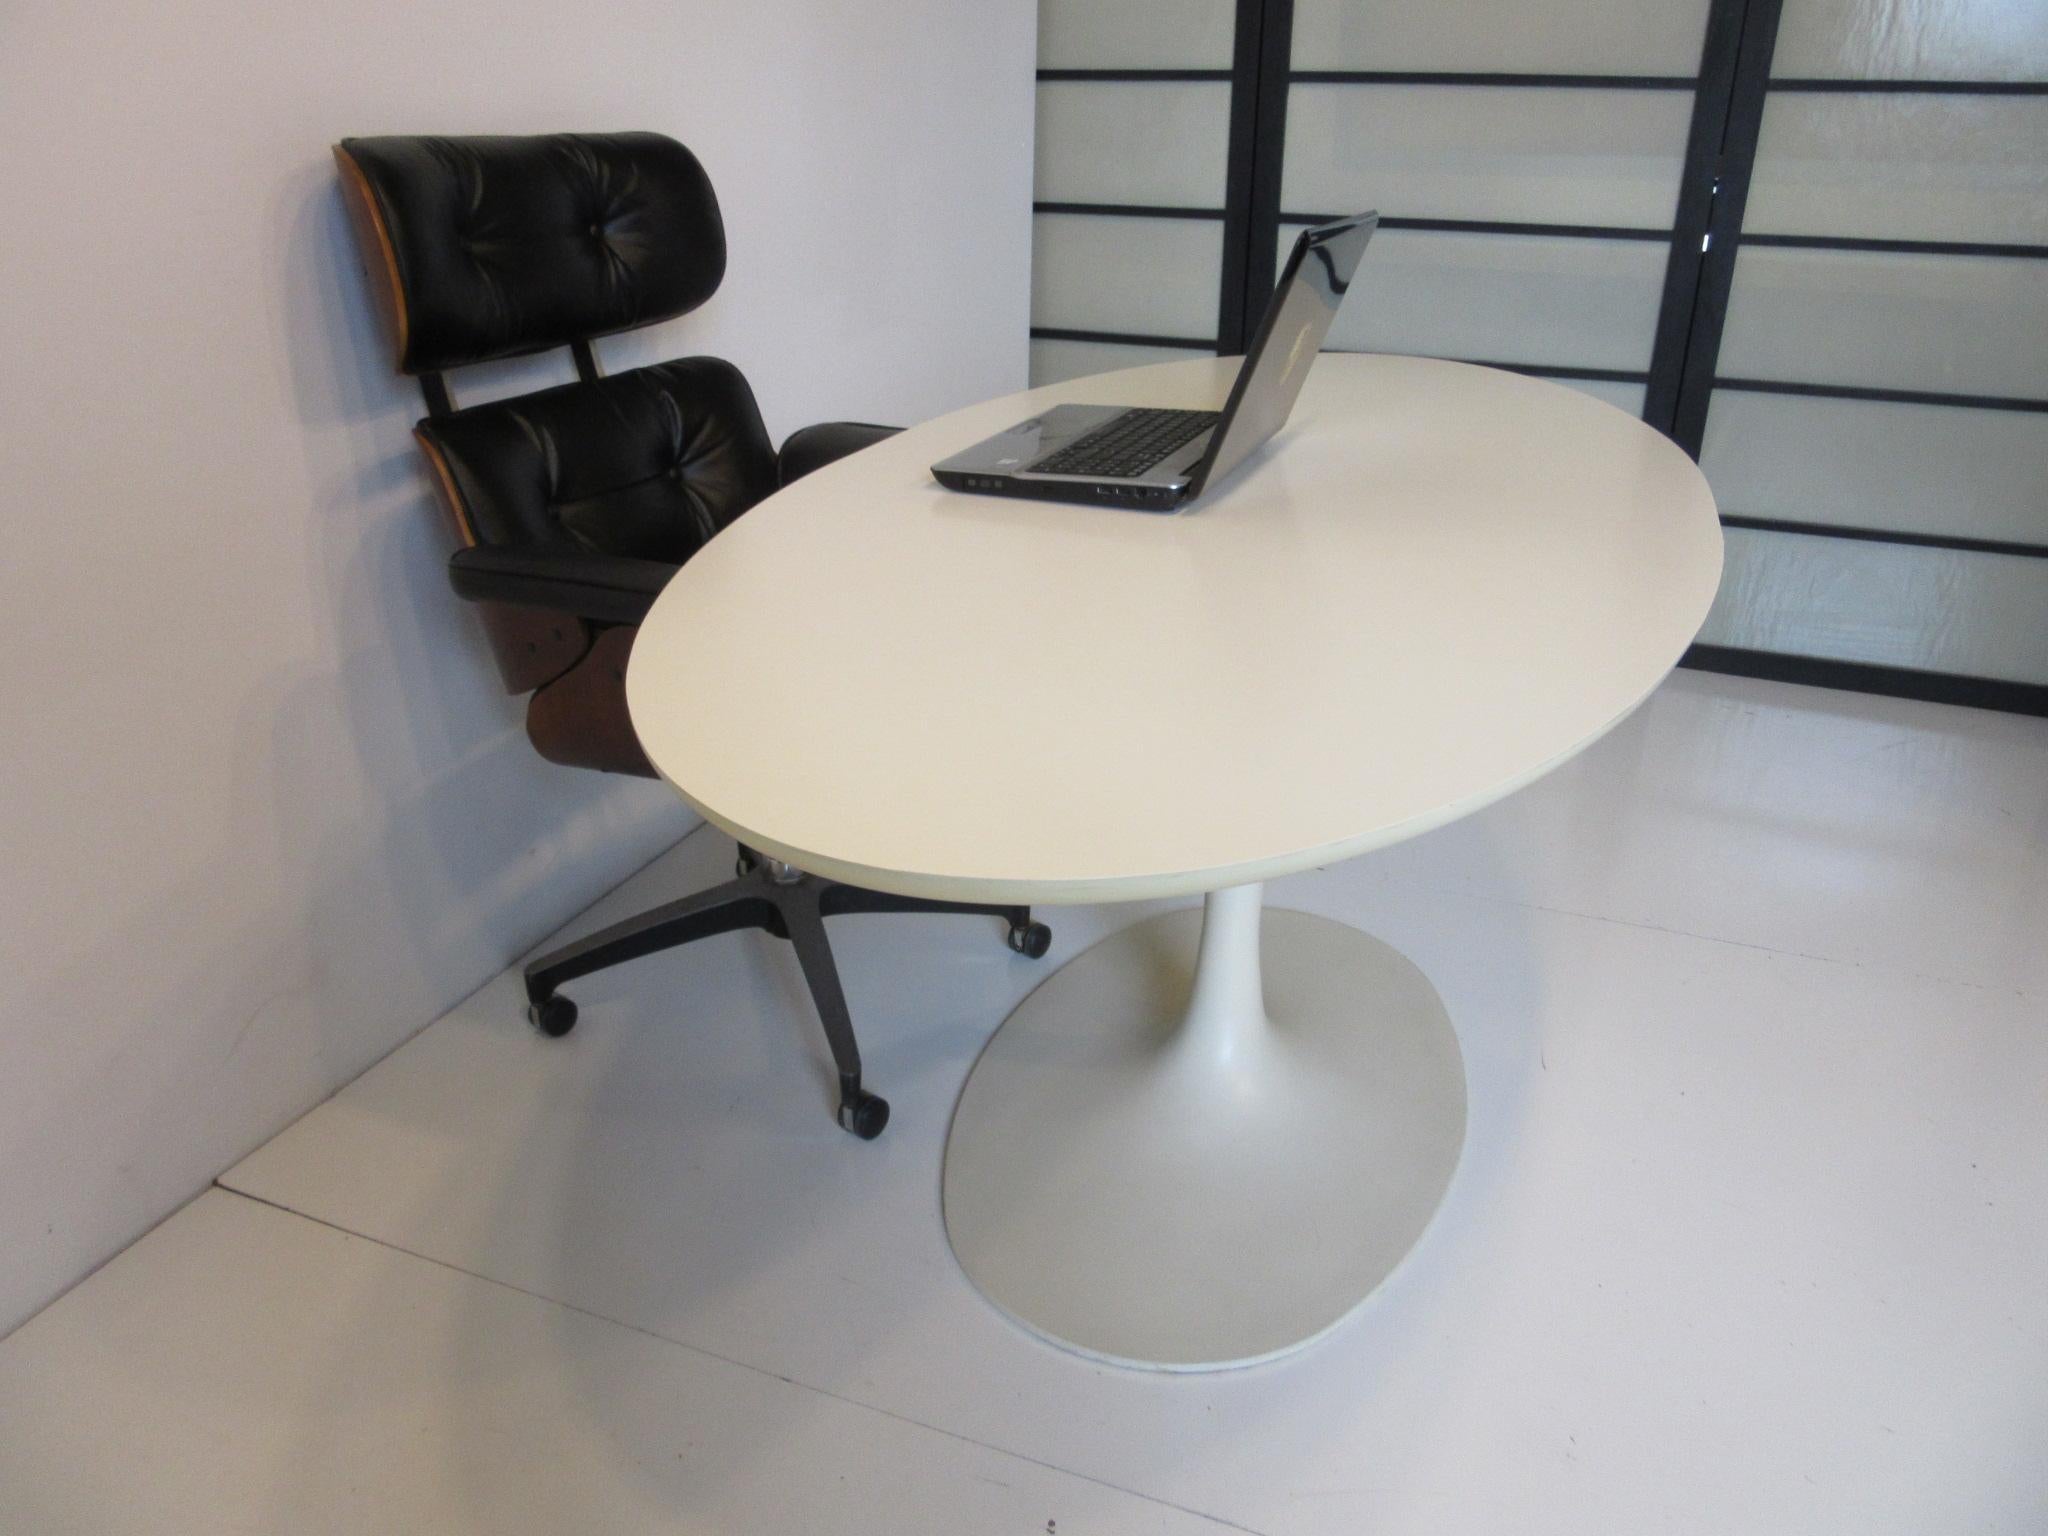 Dining Table or Tulip Desk by Maurice Burke in the style of Saarinen  1